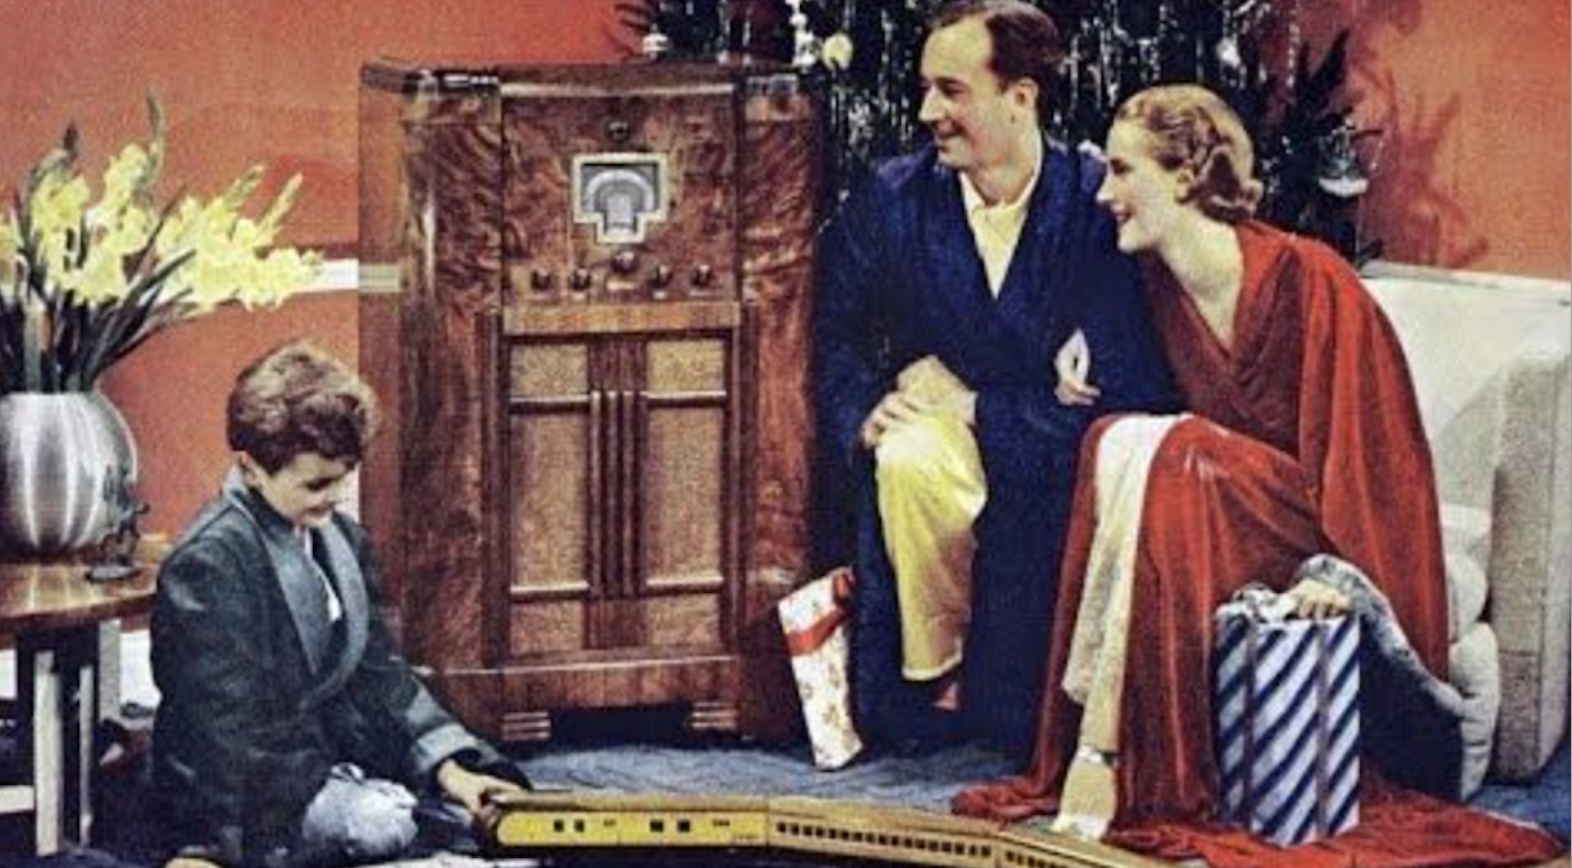 Christmas Old Time Radio, Podcasts en Audible